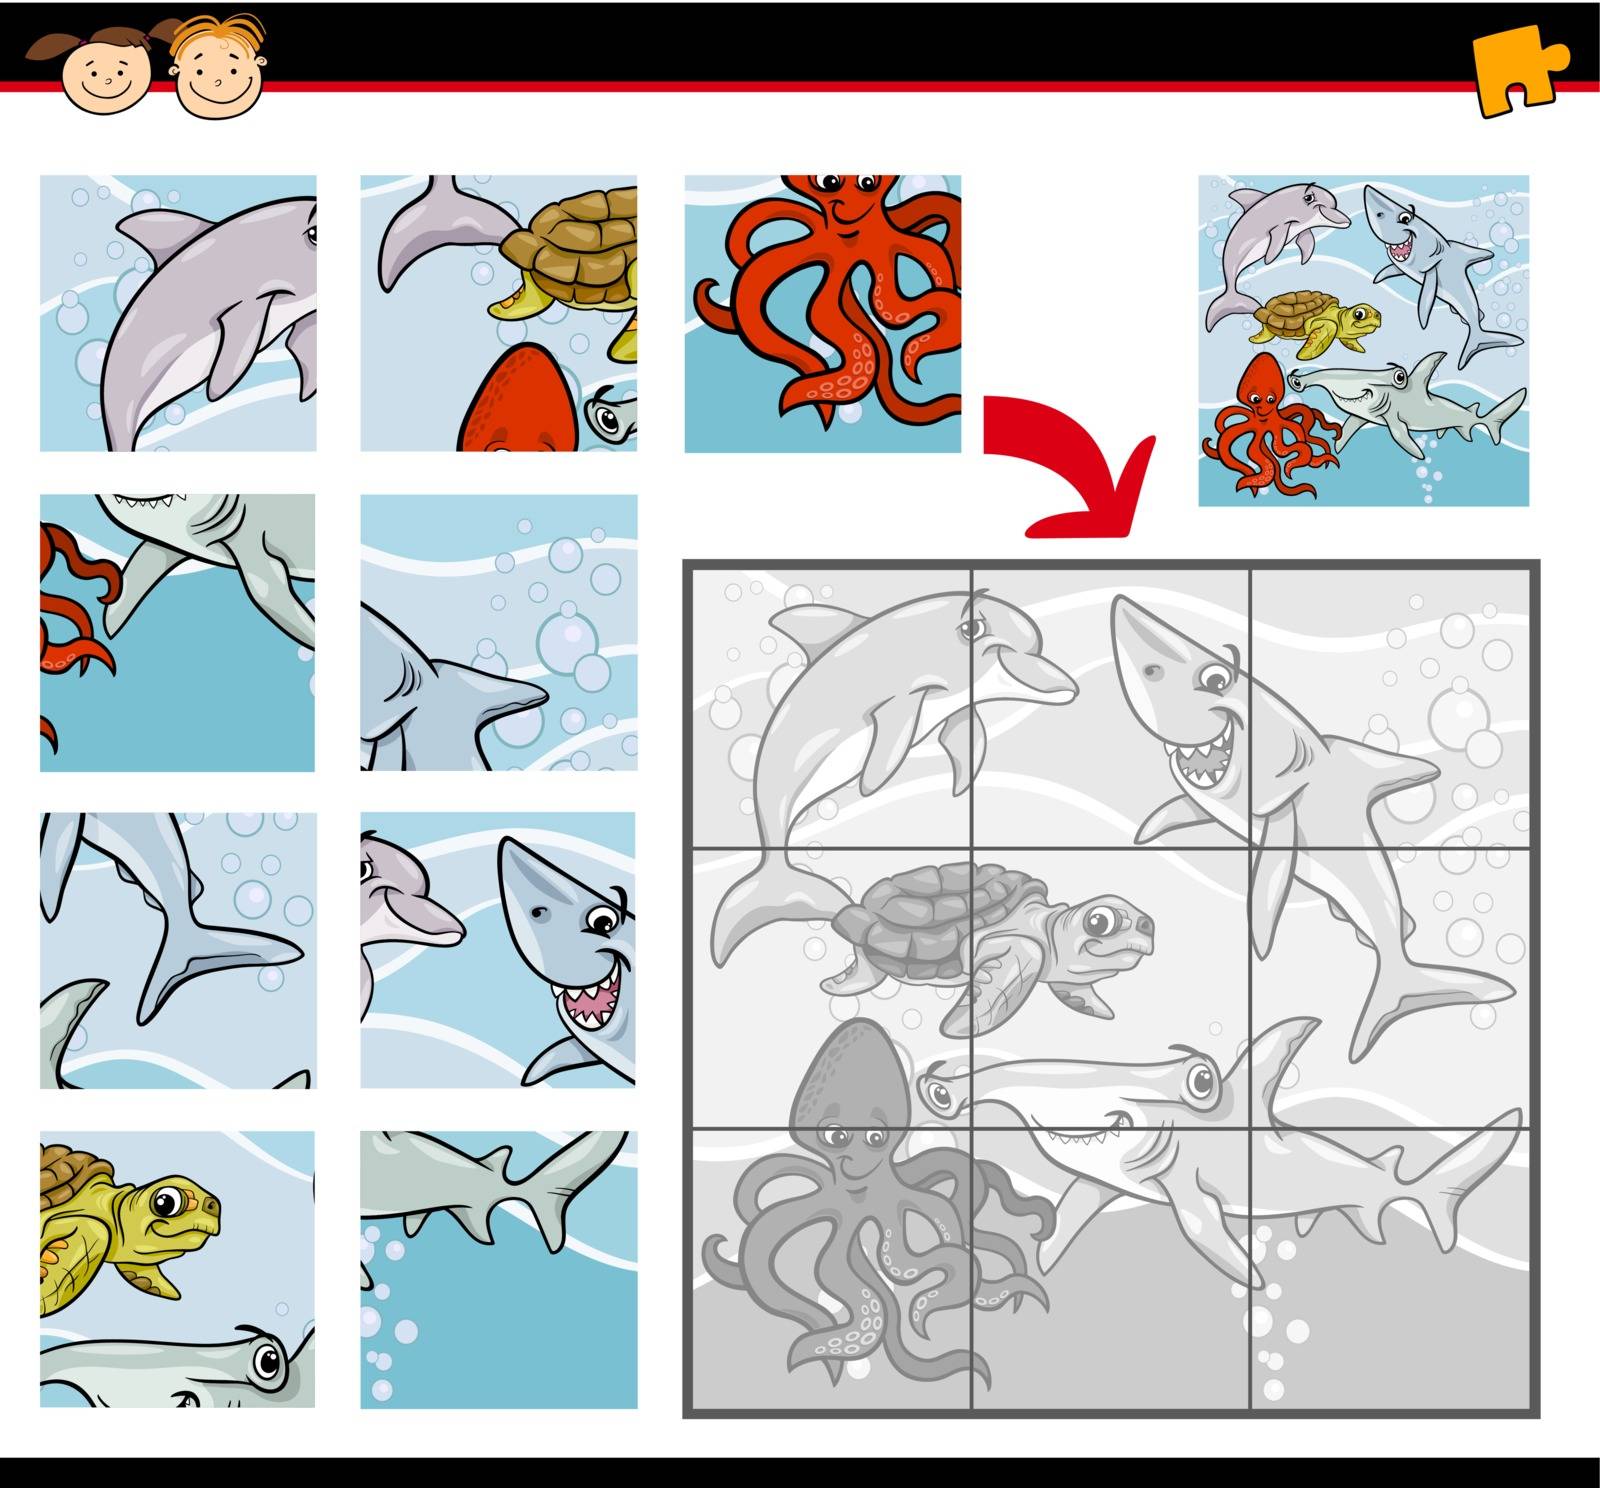 Cartoon Illustration of Education Jigsaw Puzzle Game for Preschool Children with Sea Life Animals or Fish Group